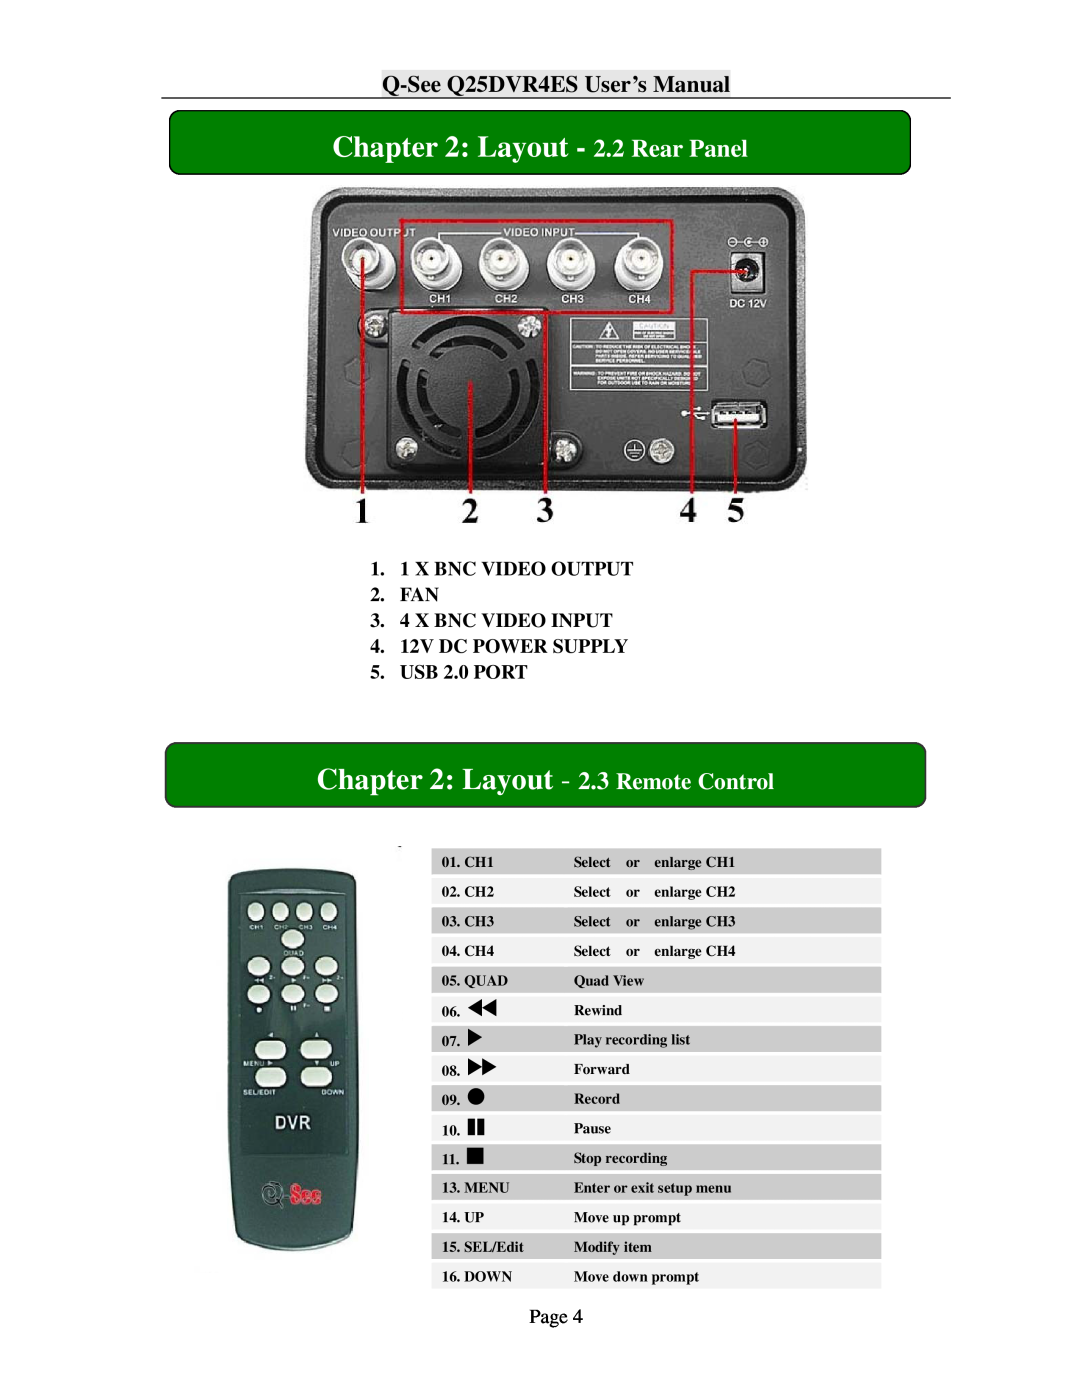 Q-See Layout - 2.2 Rear Panel, Layout - 2.3 Remote Control, Q-SeeQ25DVR4ES User’s Manual, X BNC VIDEO OUTPUT 2.FAN 